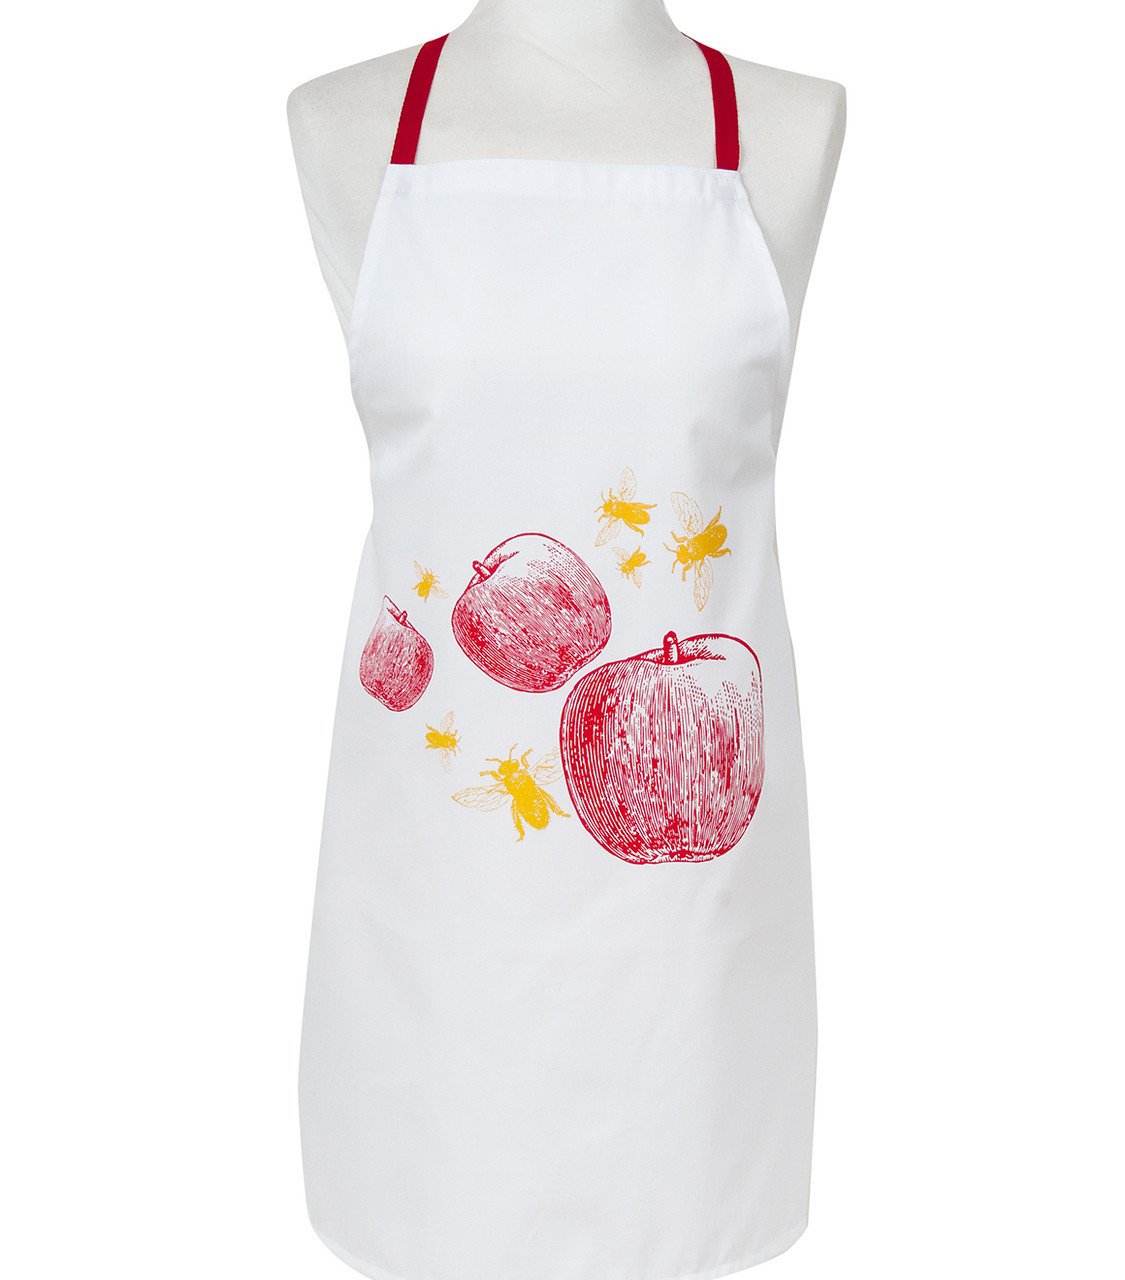 Barbara Shaw Aprons Red Apples and Bees Apron